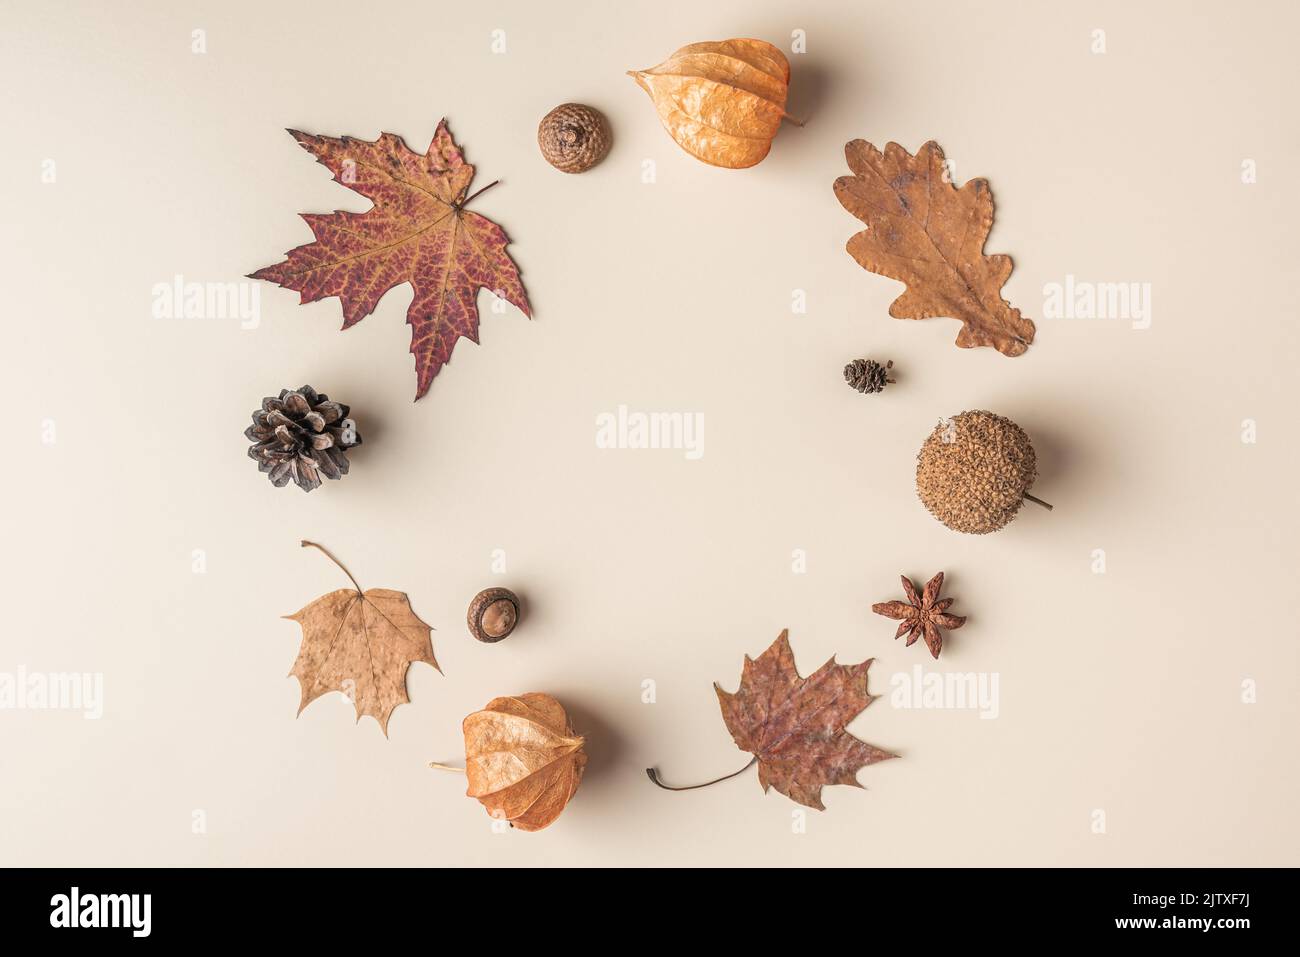 Autumn composition. Frame made of dry leaves, flowers, acorn, pine cone, anise star on beige background. Flat lay, top view with copy space Stock Photo